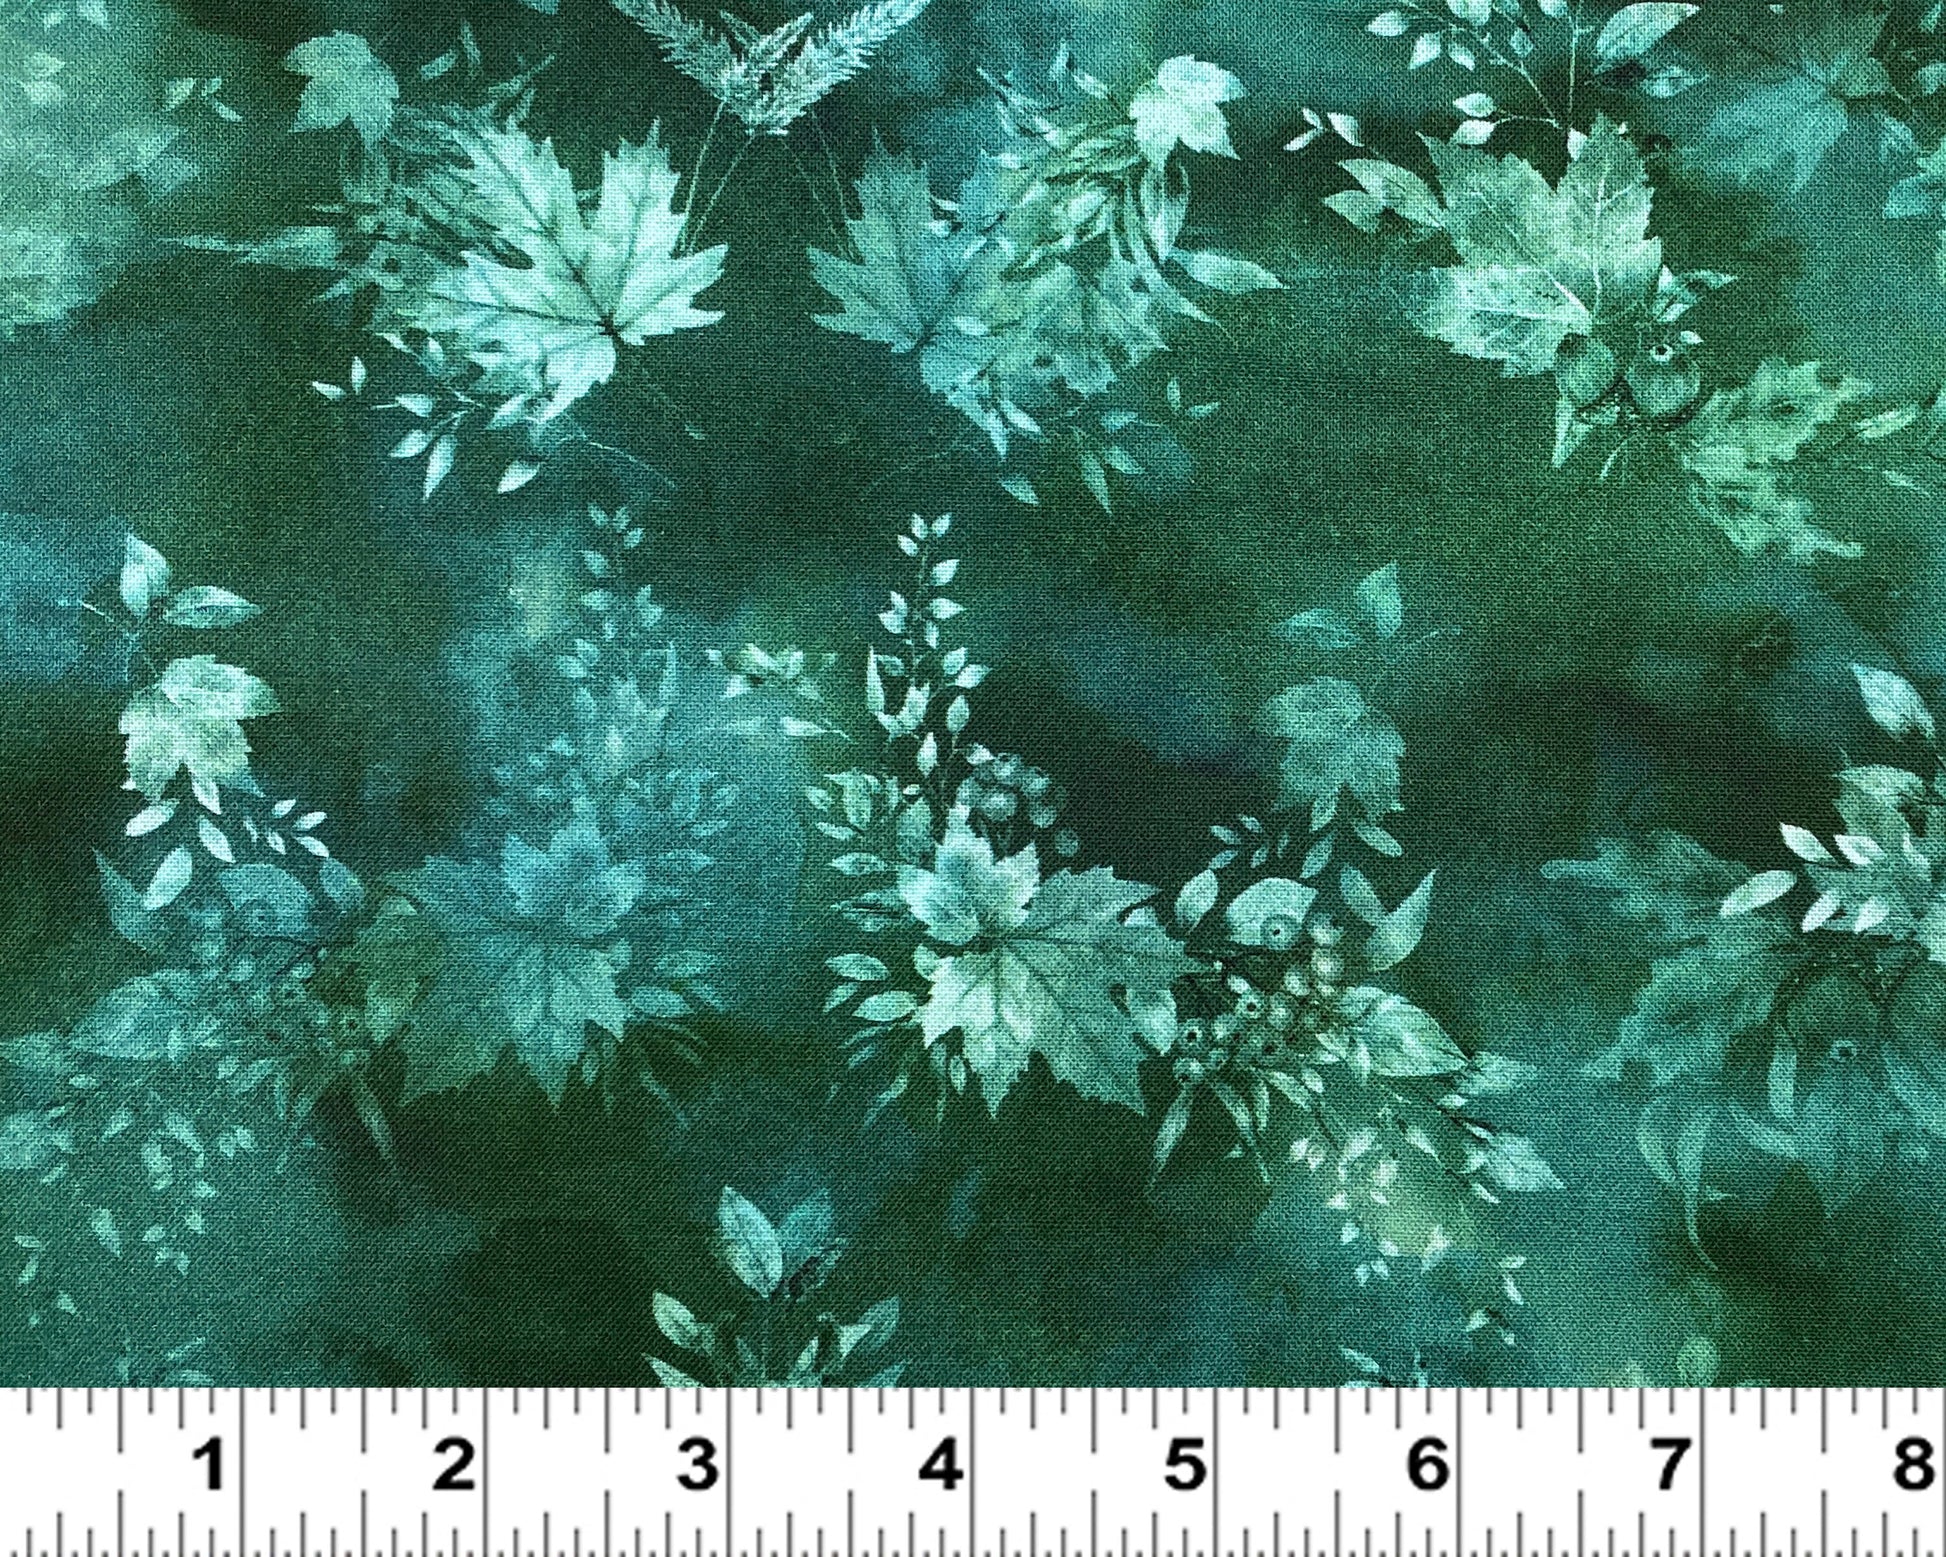 Hoffman Leaf fabric by the yard - Emerald - Forest Tales - 100% Cotton - forest material jewel tone leaves fall theme - SHIPS NEXT DAY